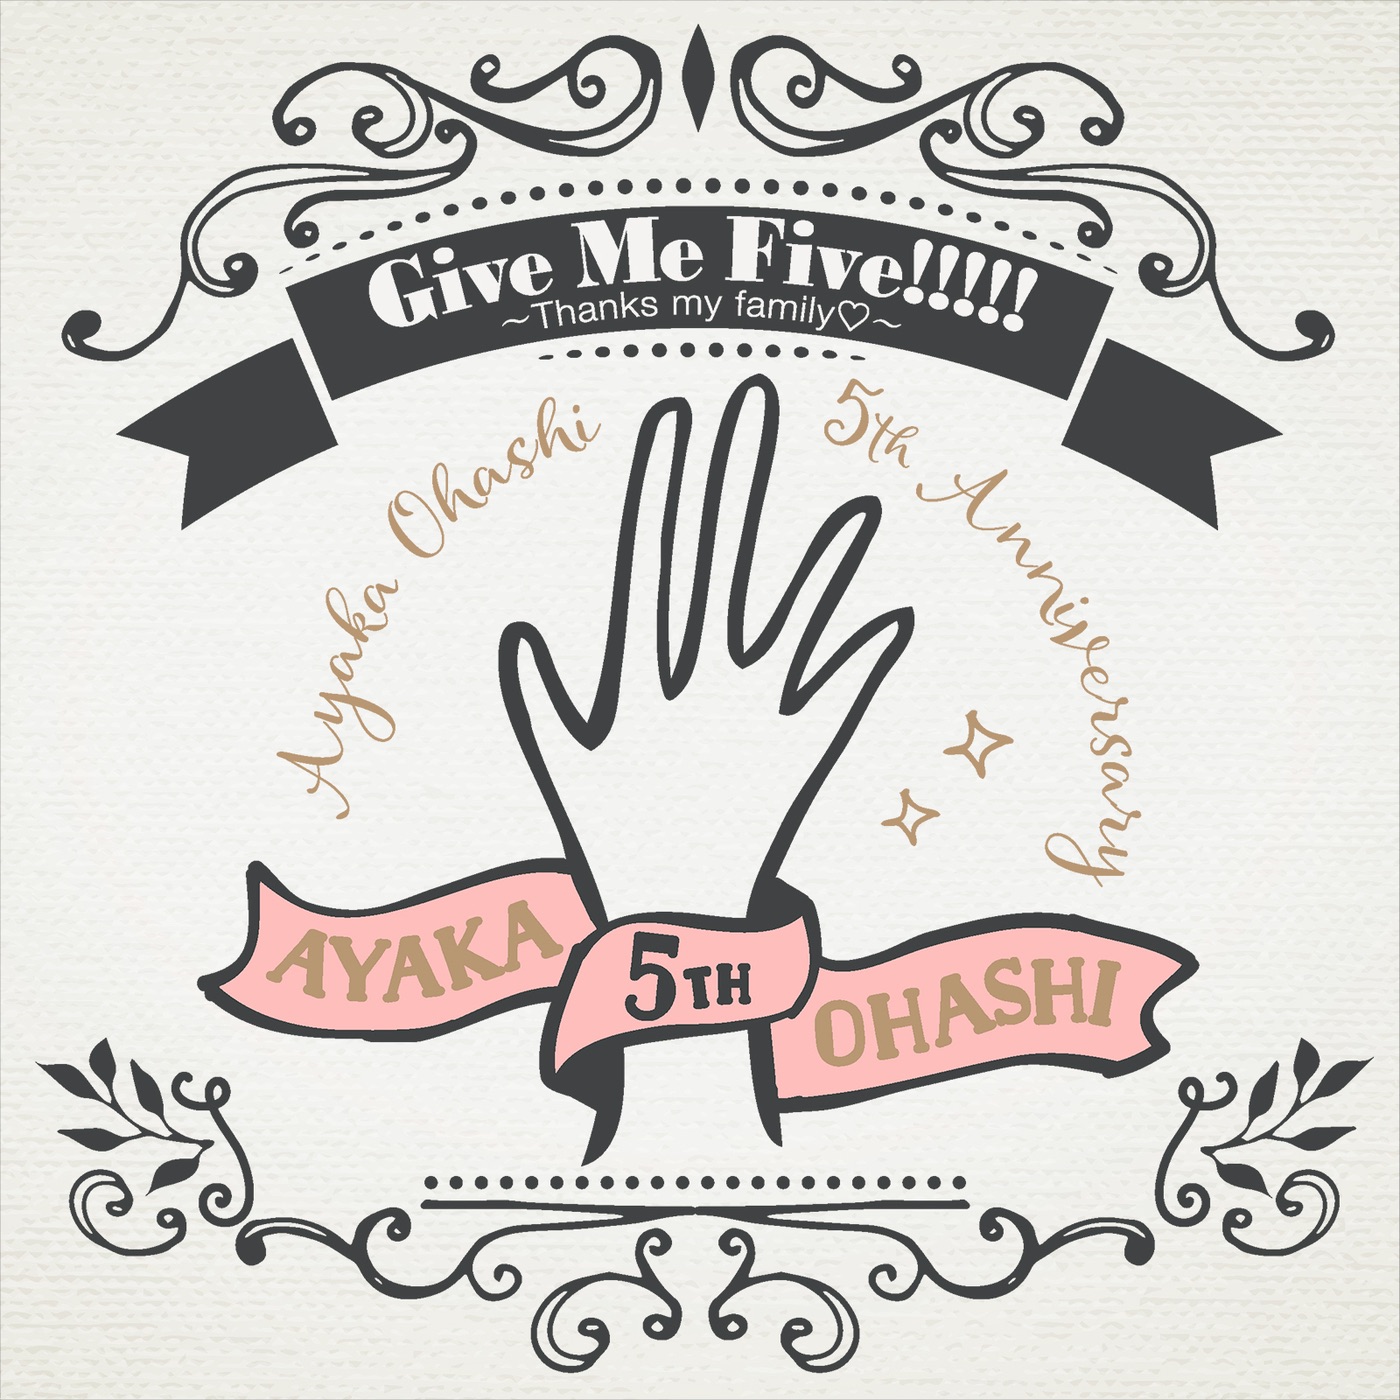 Gimme Five. Give me Five. 5 Thanks. Angel Heart give me Five. Five thanks